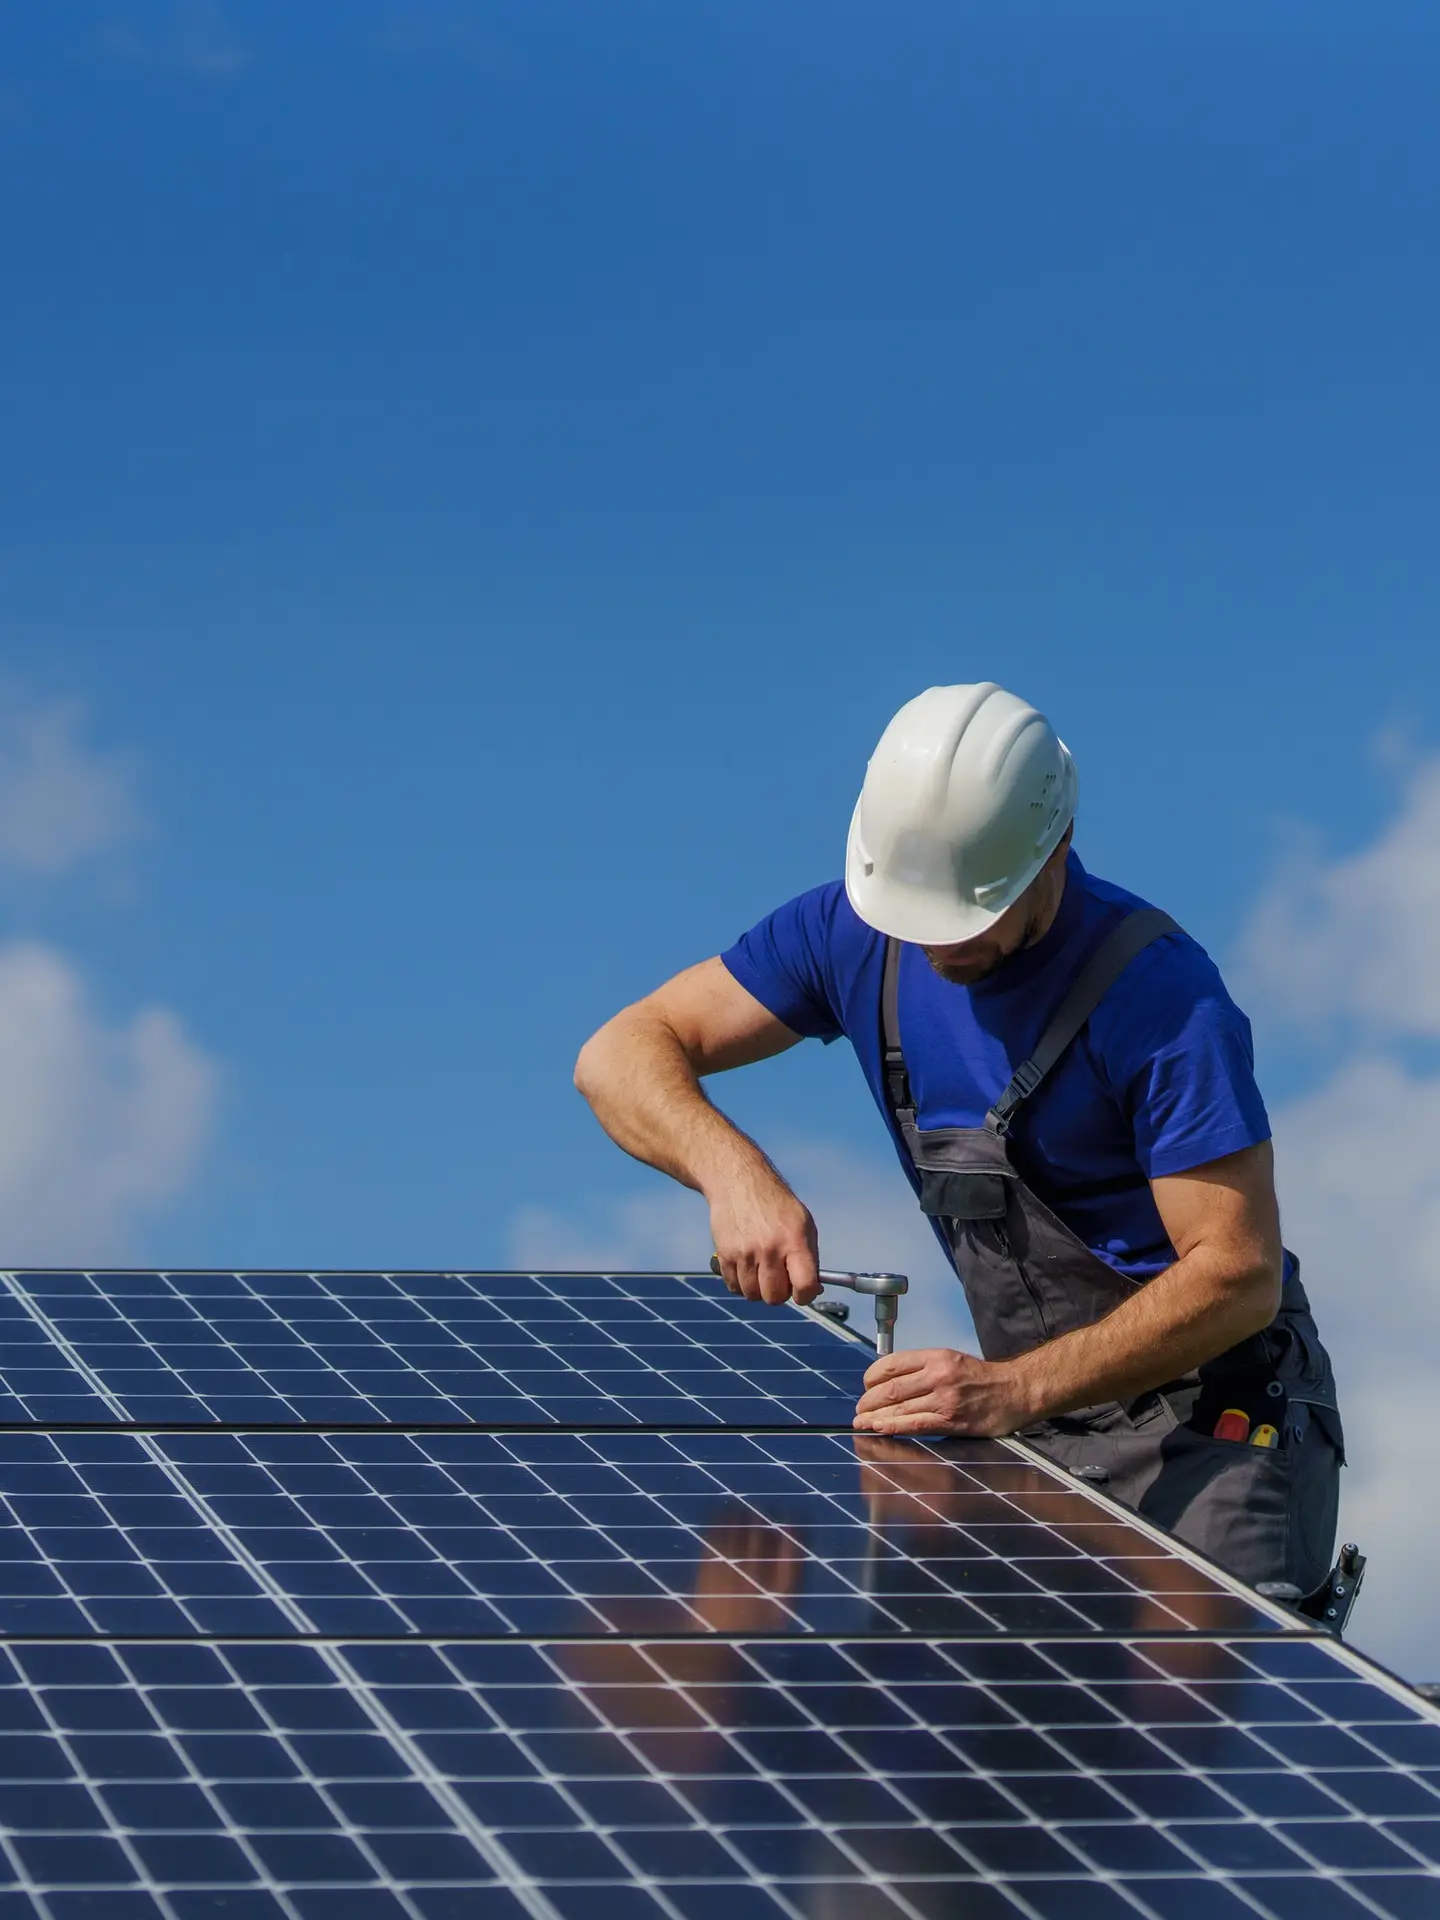 Man worker installing solar photovoltaic panels on roof, alternative energy concept.